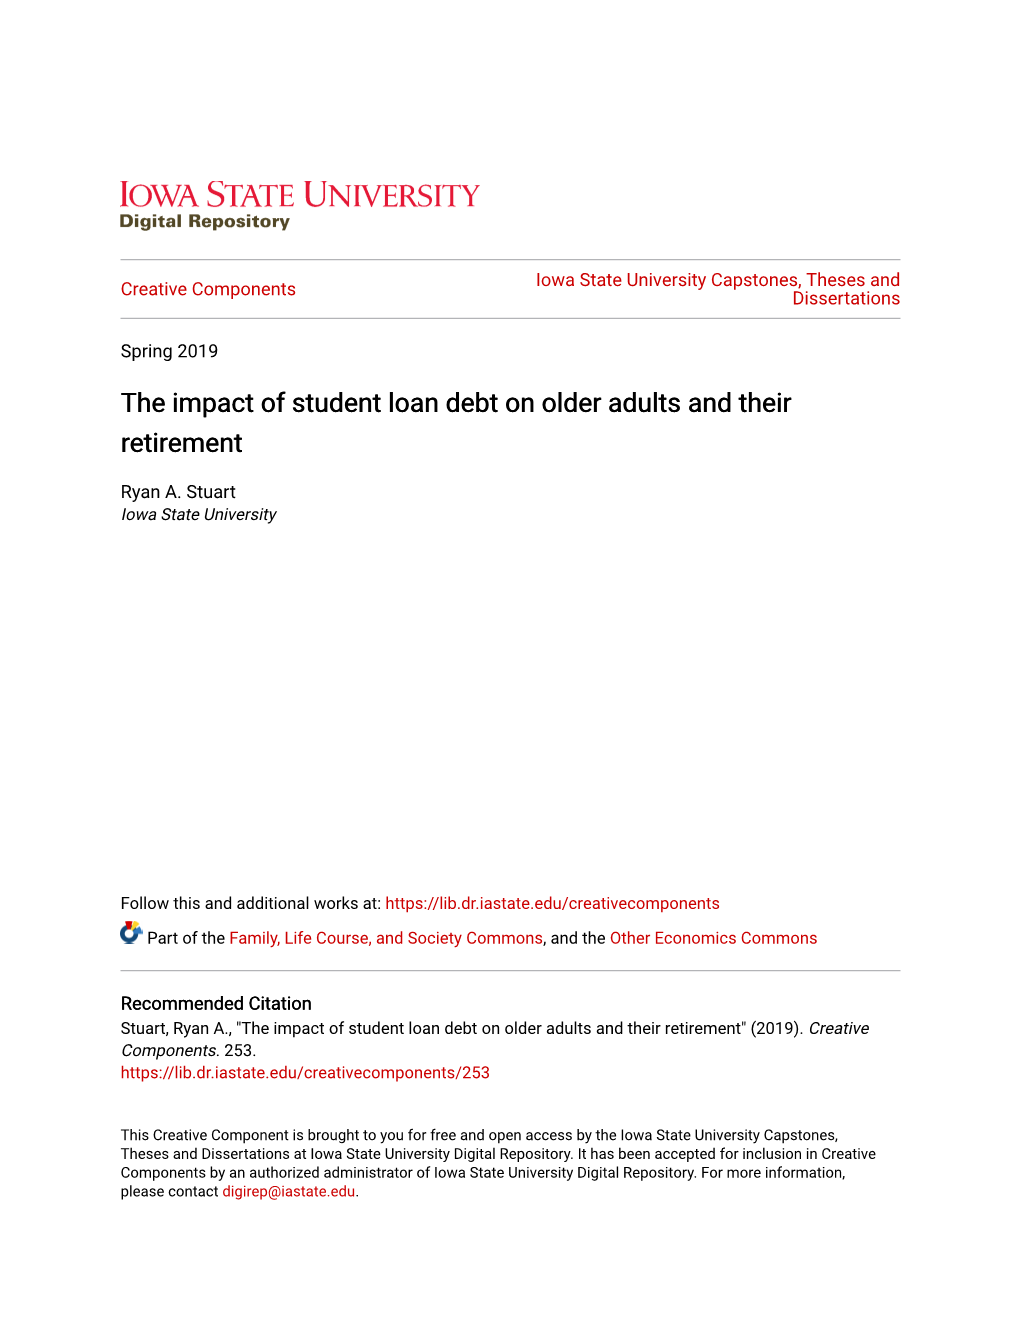 The Impact of Student Loan Debt on Older Adults and Their Retirement